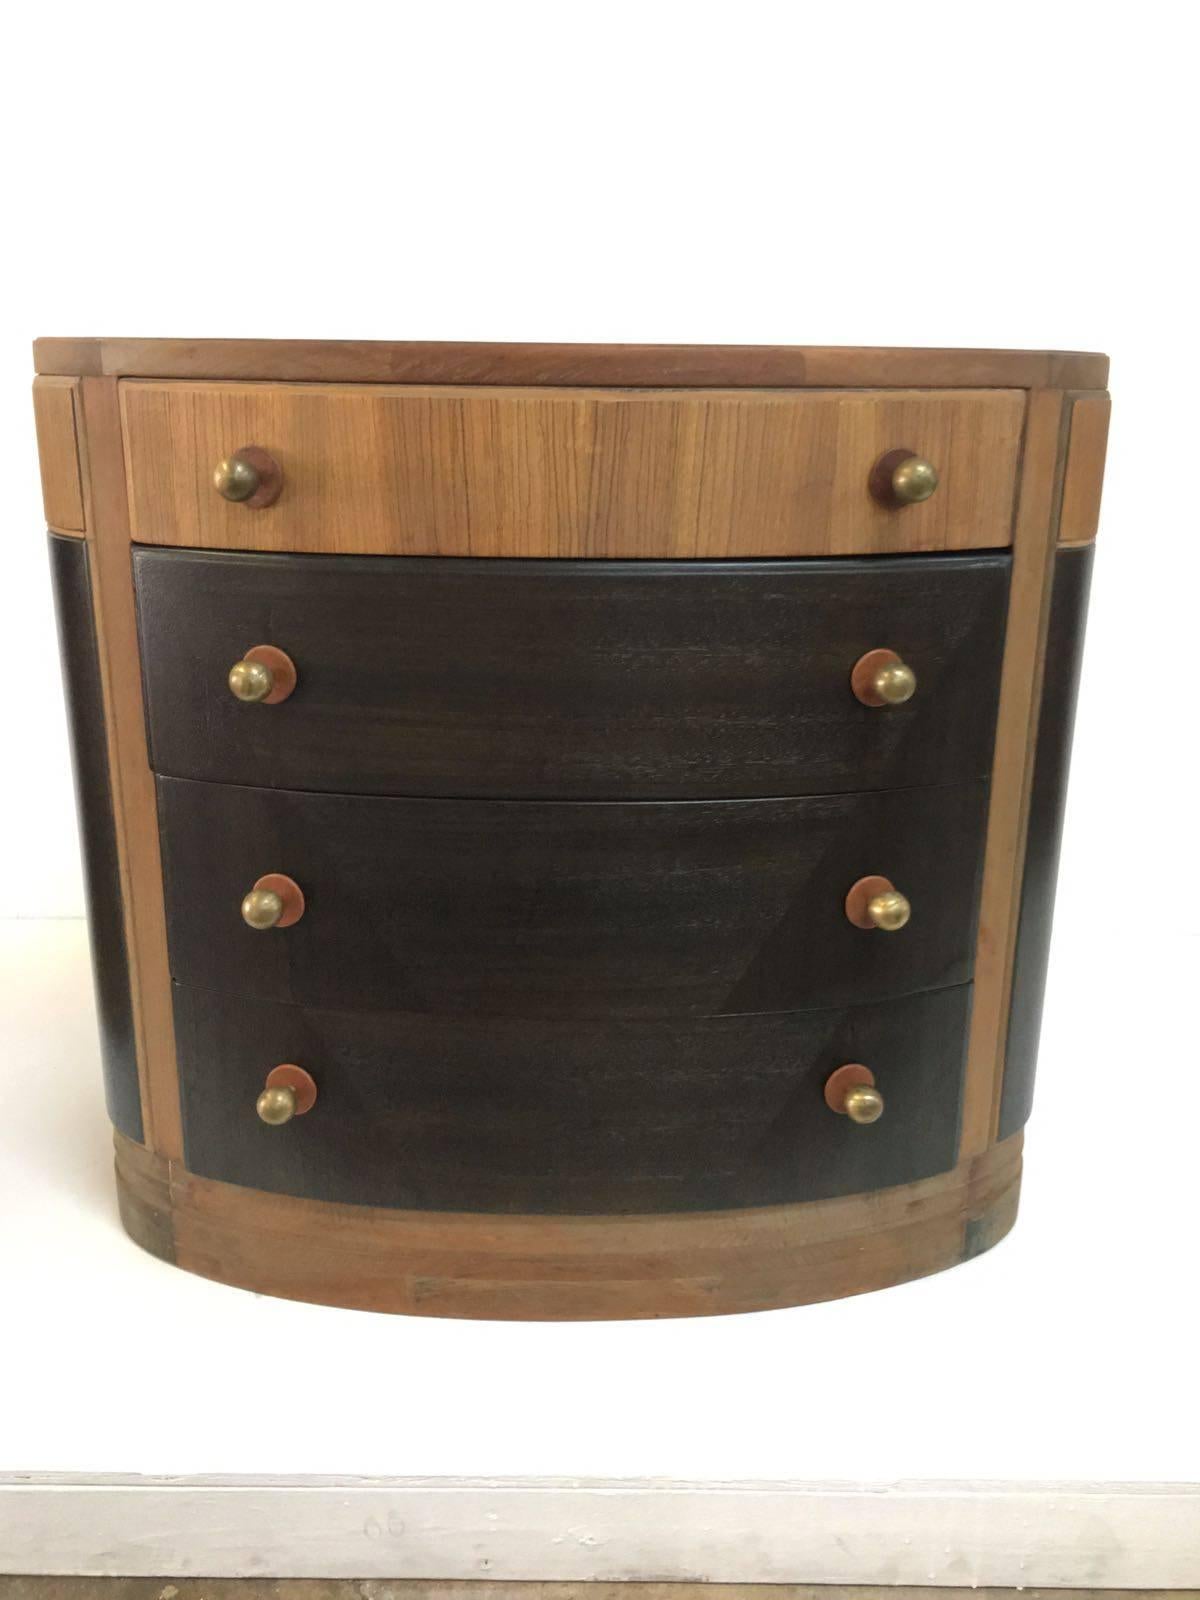 Brass and leather trimmed pulls on these fabulous veneered demilune gentlemen's cabinets or nightstands. Four drawers for ample storage and two tones with great detail of the wood work.